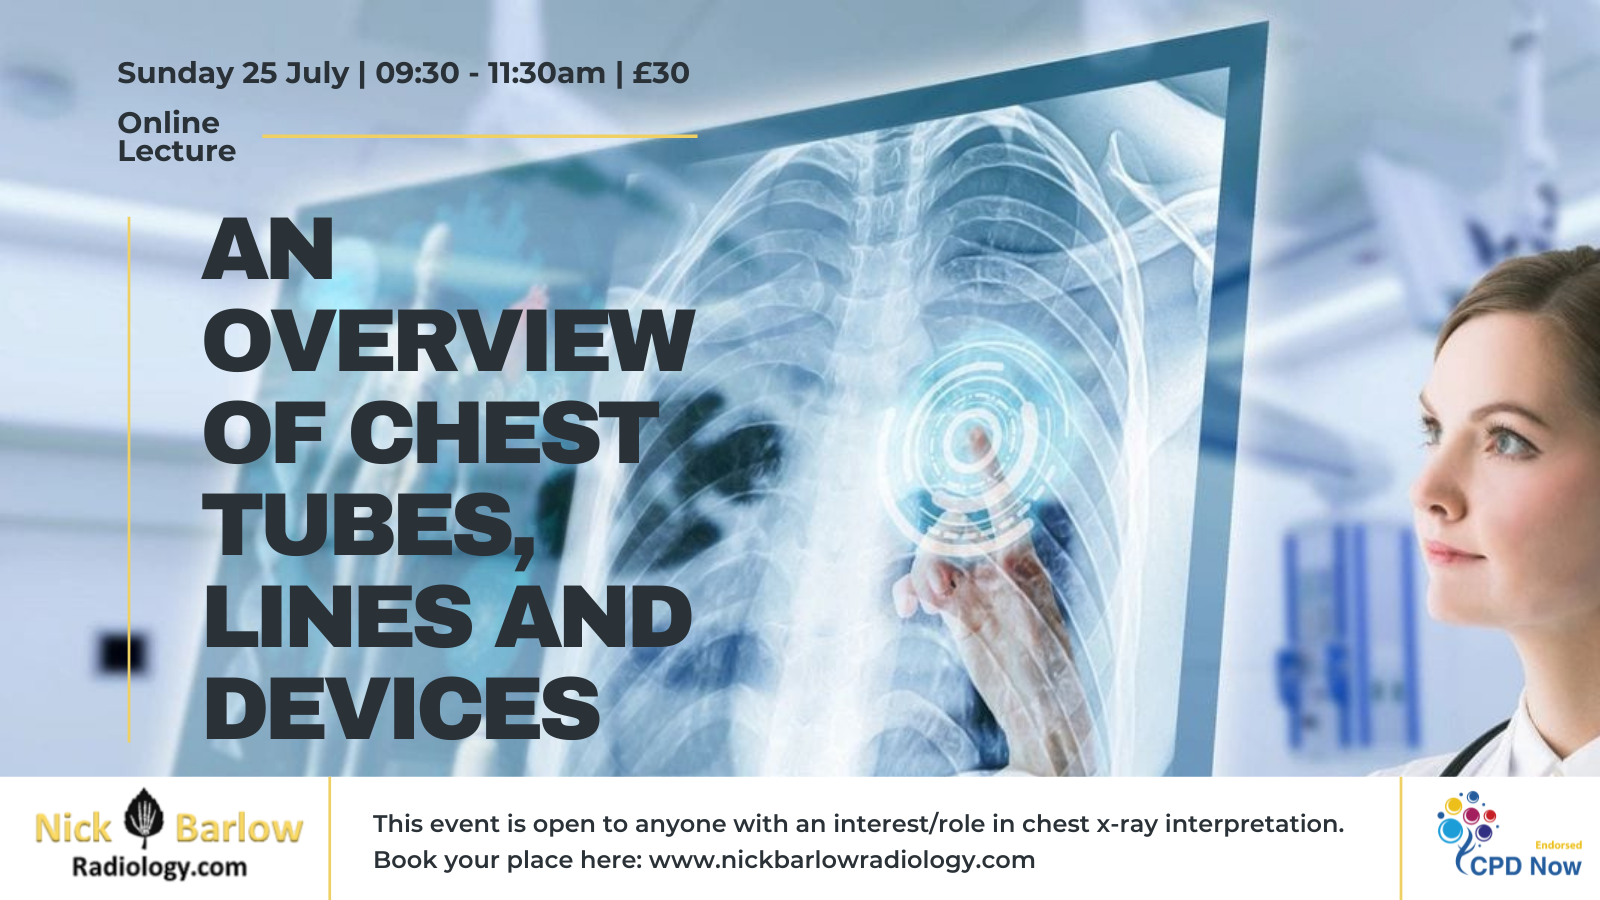 Online Lecture: An Overview of Chest Tubes, Lines and Devices Advert